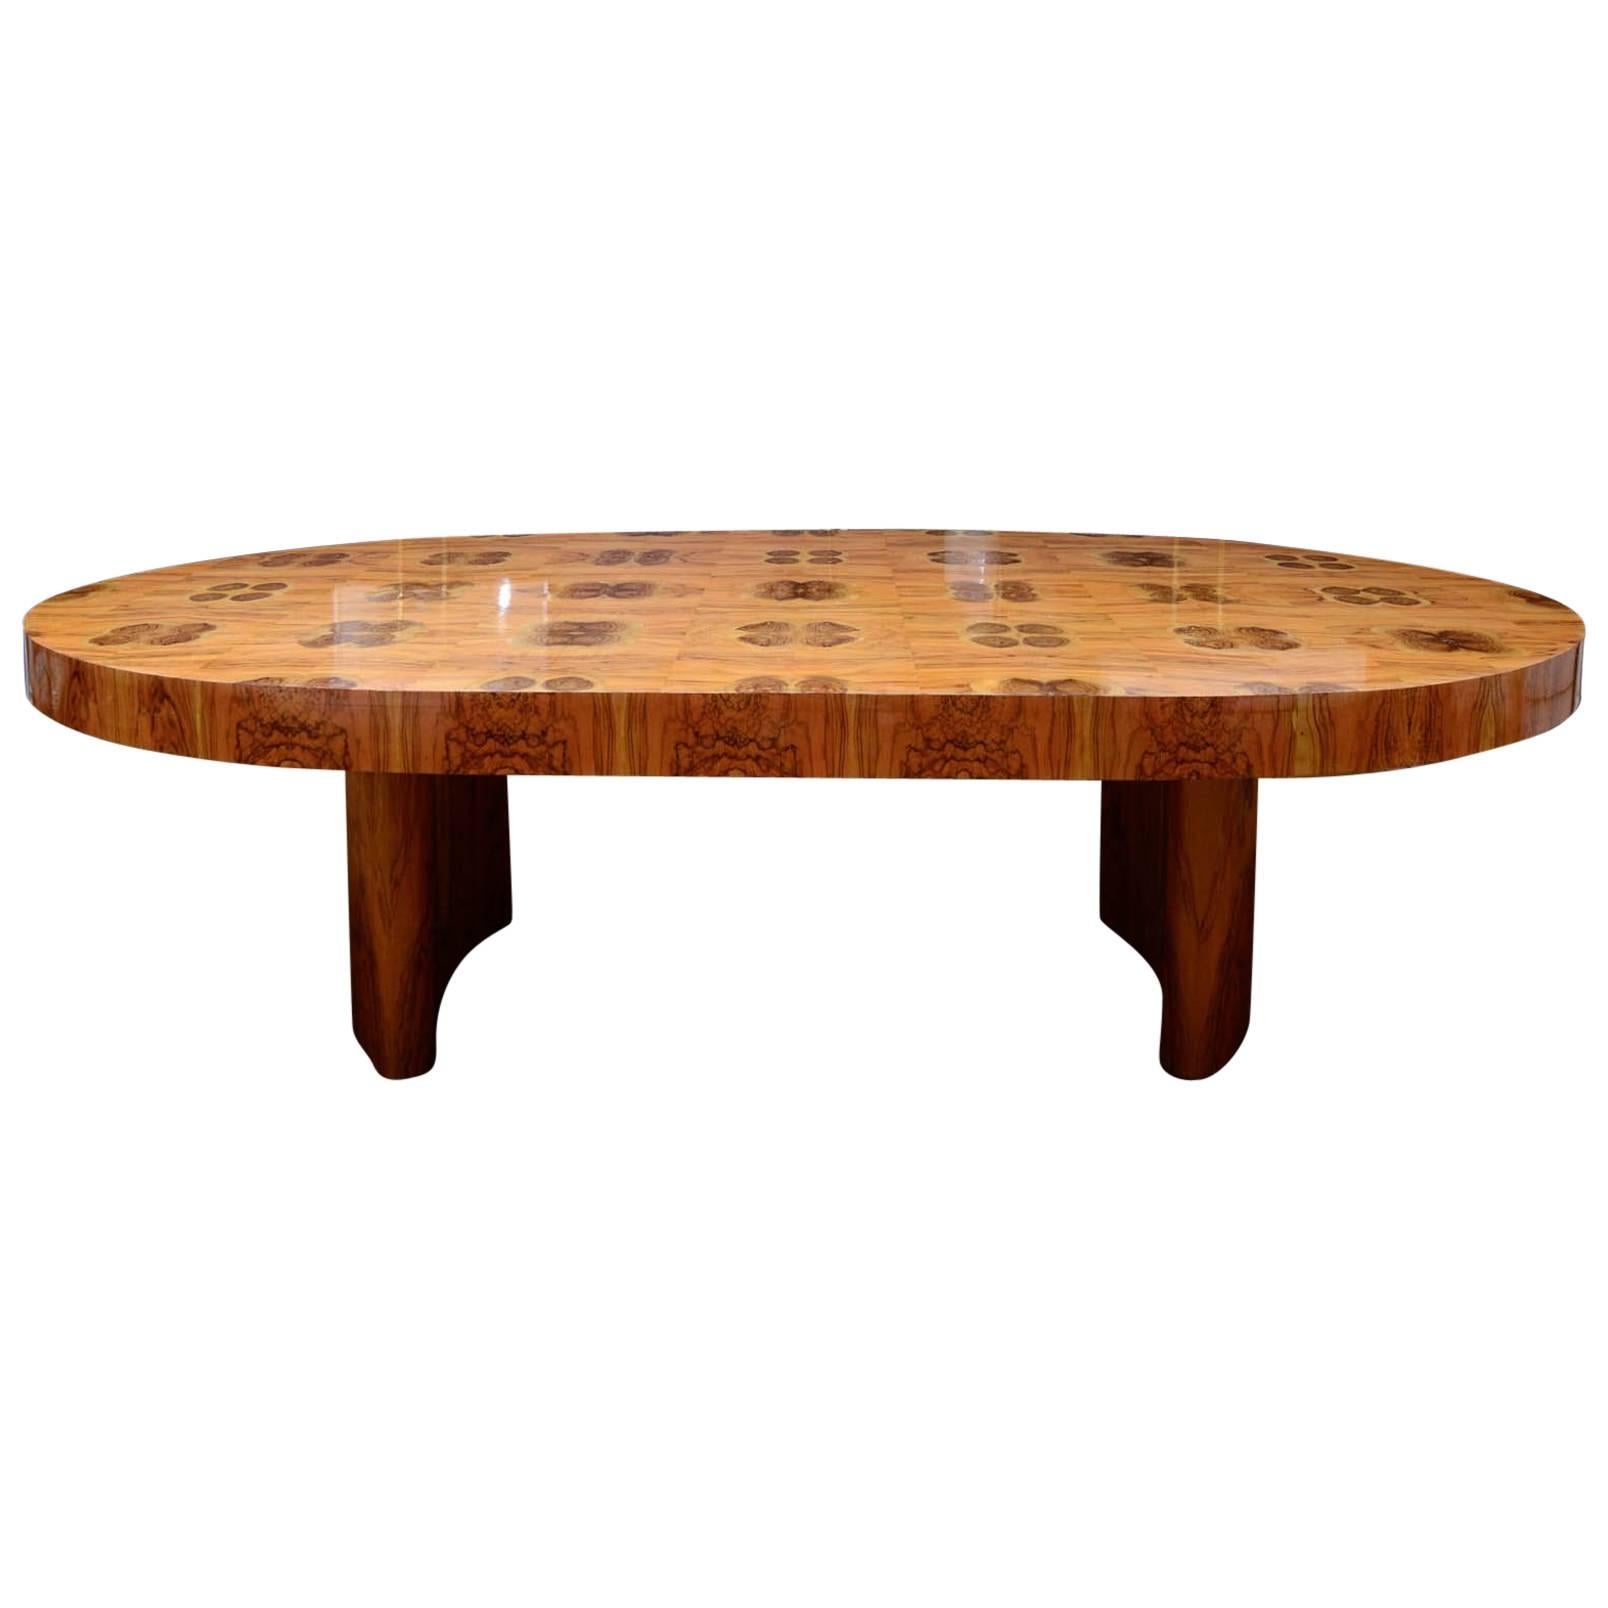 Exceptional Oval Dining Table at cost price